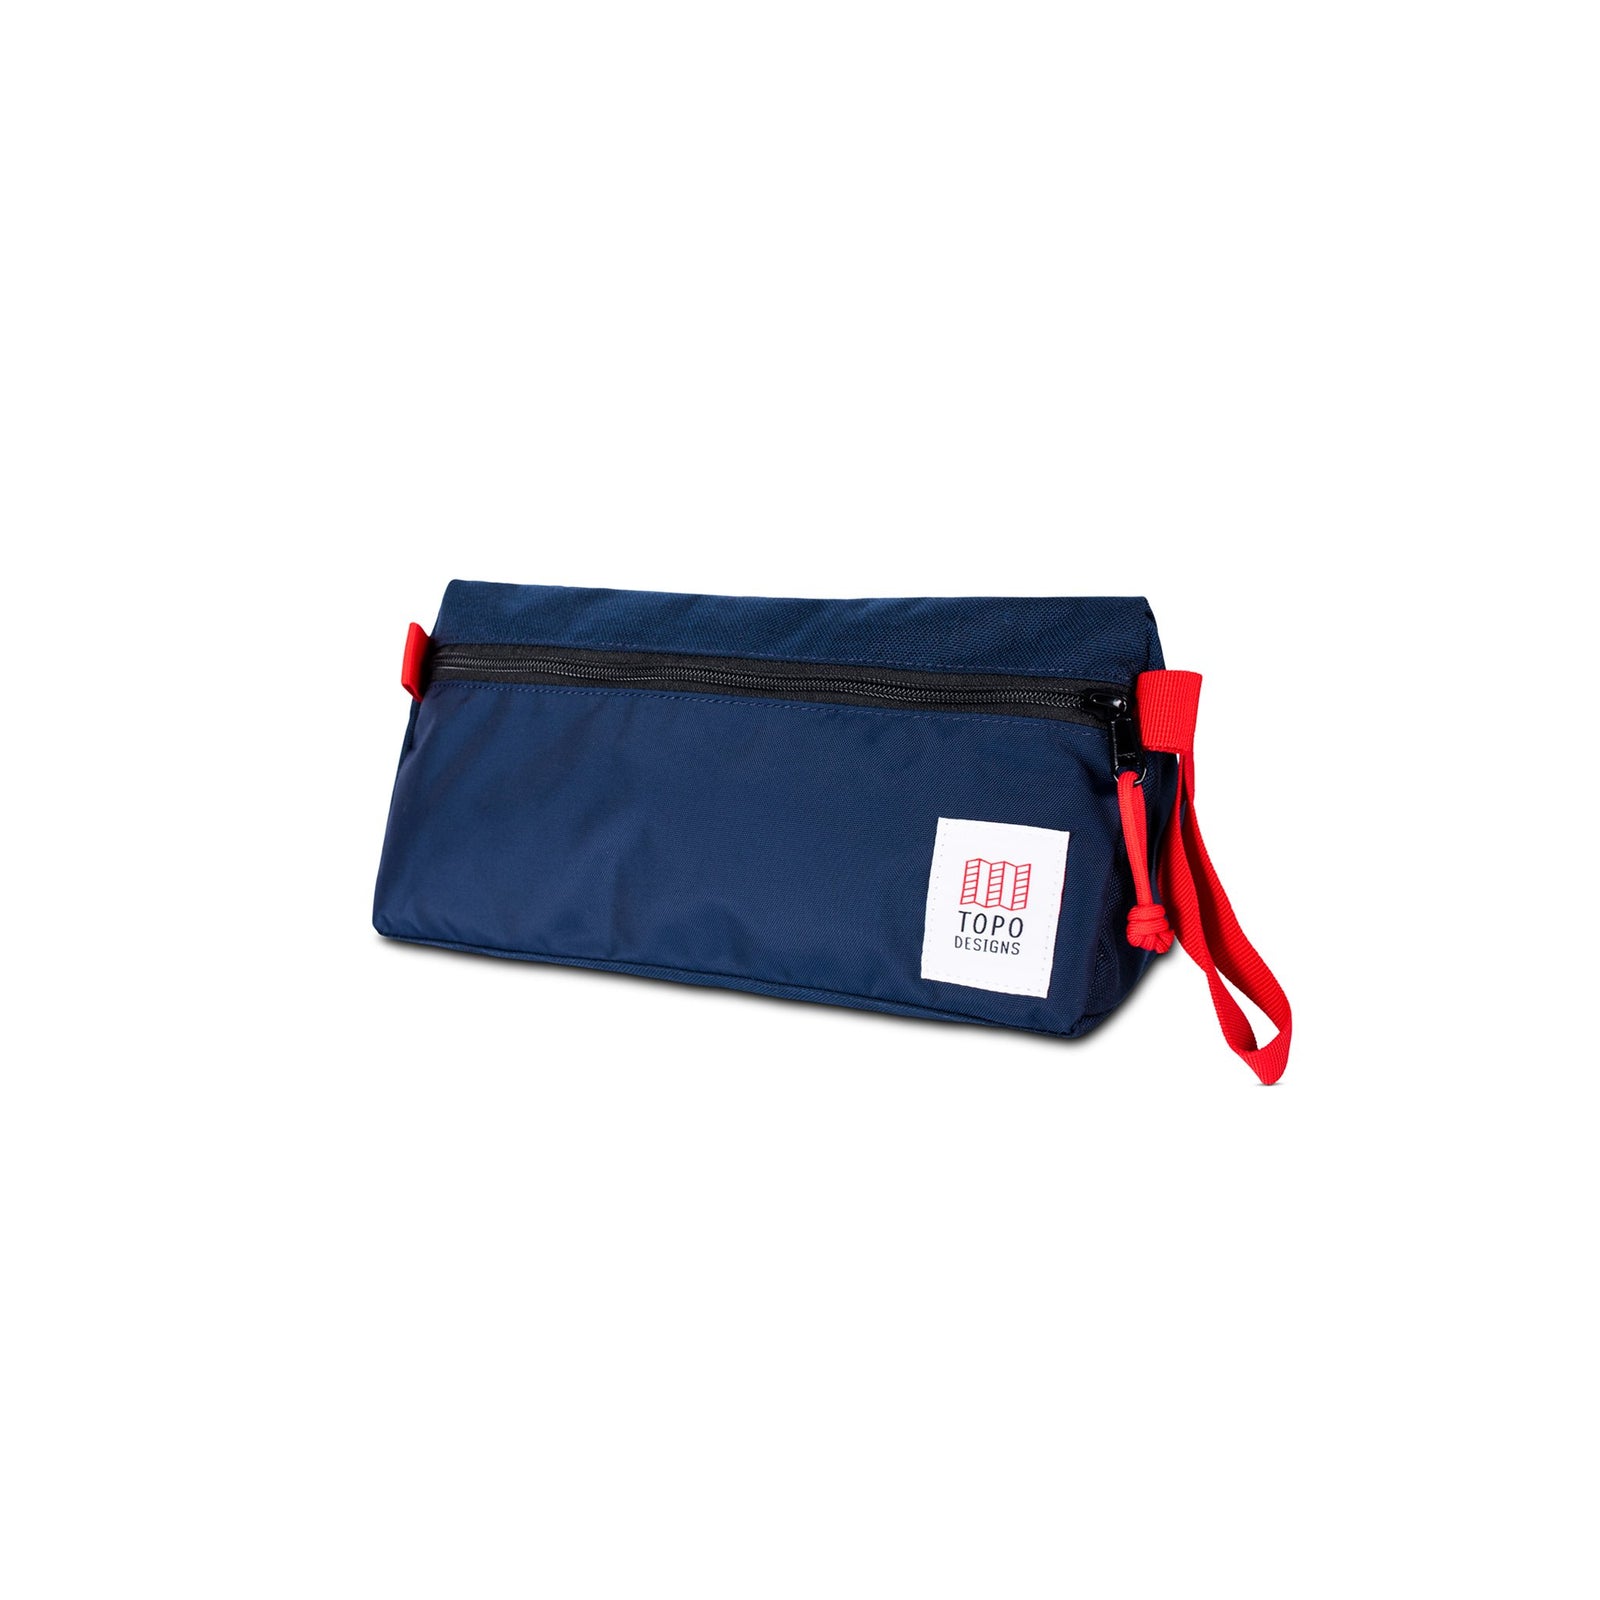 3/4 front product shot of Topo Designs Dopp Kit in "Navy - Recycled" blue.